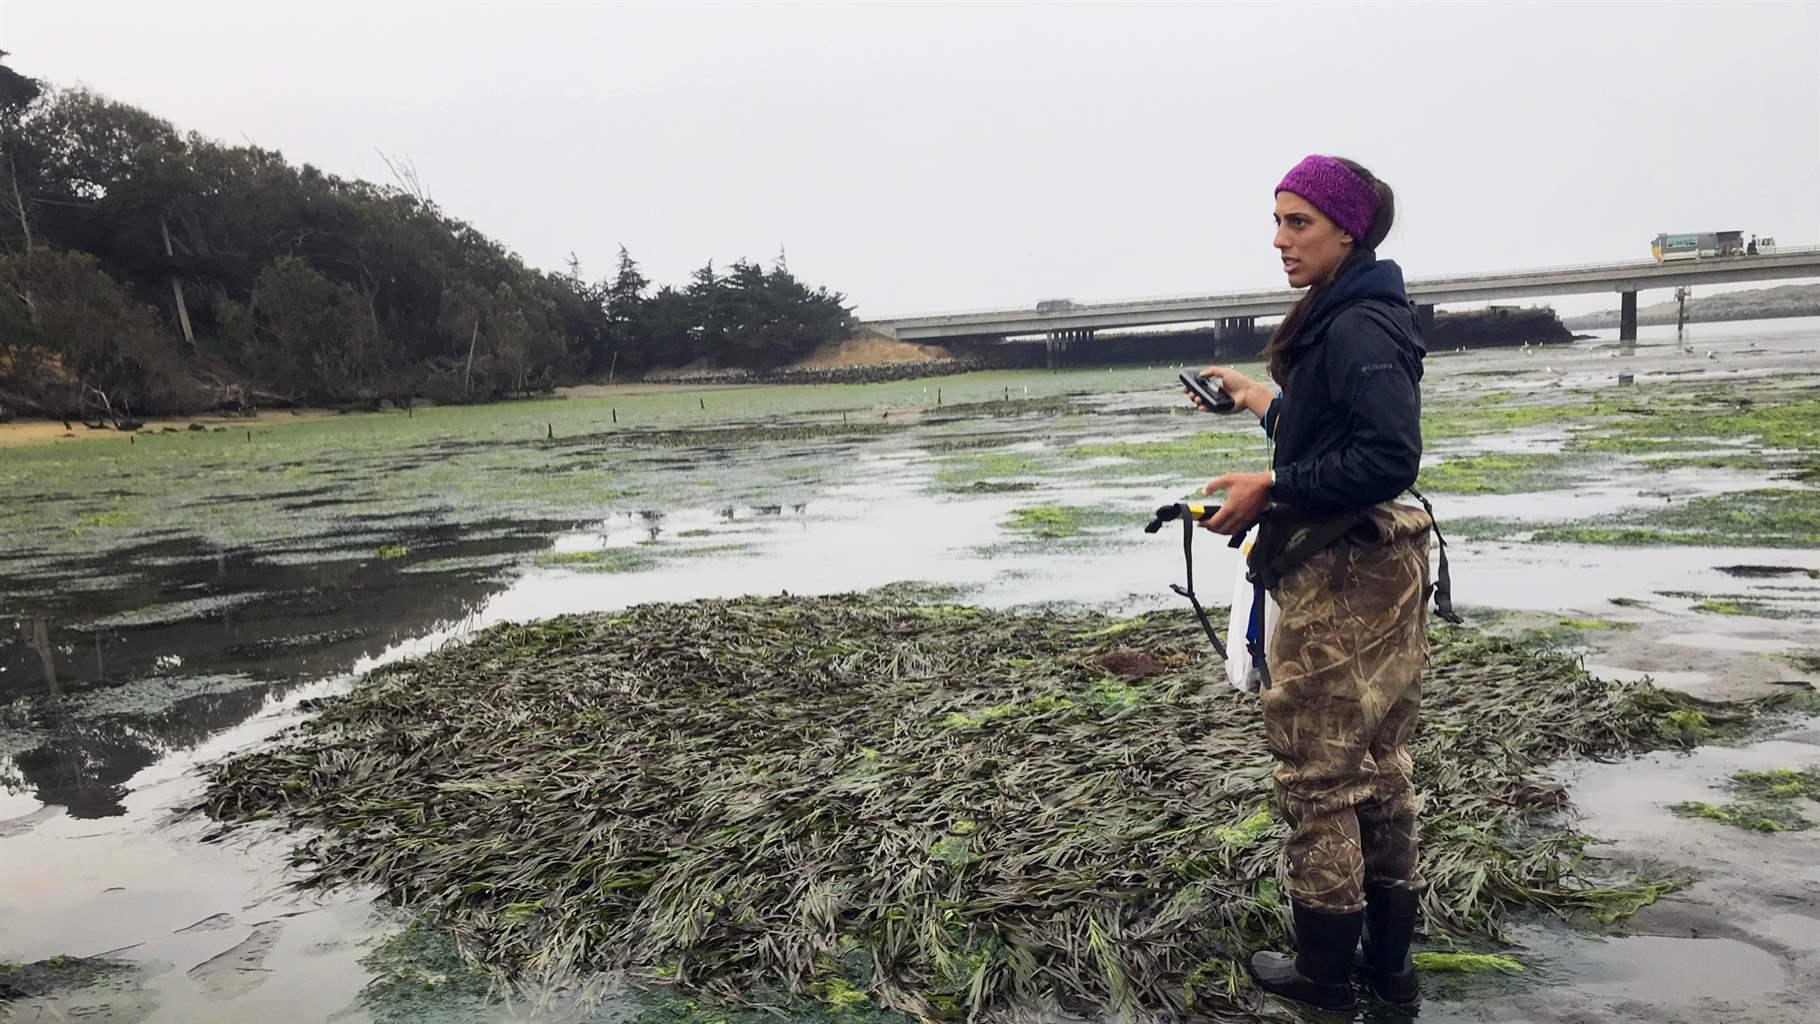 Scientist Kathryn Beheshti uses a GPS to locate patches of eelgrass in Elkhorn Slough, California, as part of a restoration study.